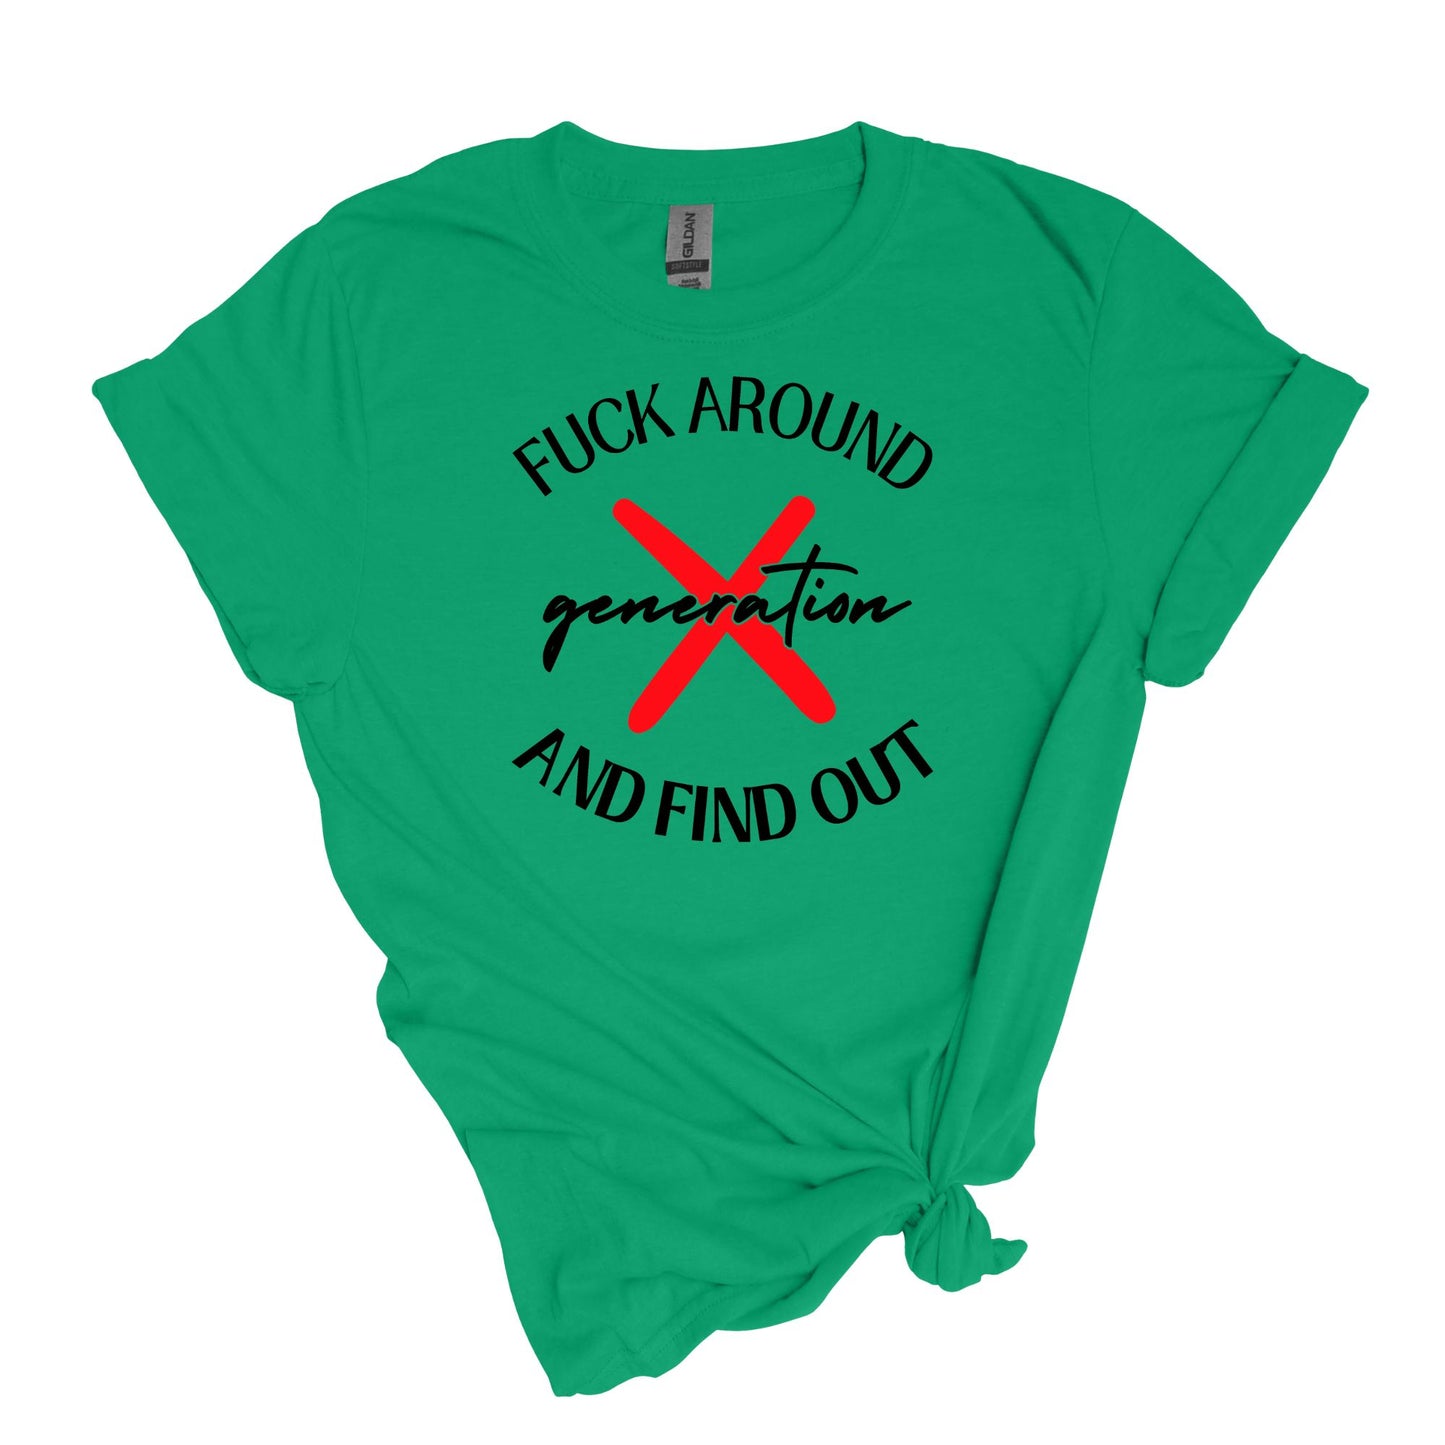 F**K AROUND AND FIND OUT - Gen X - Adult Soft-style T-shirt